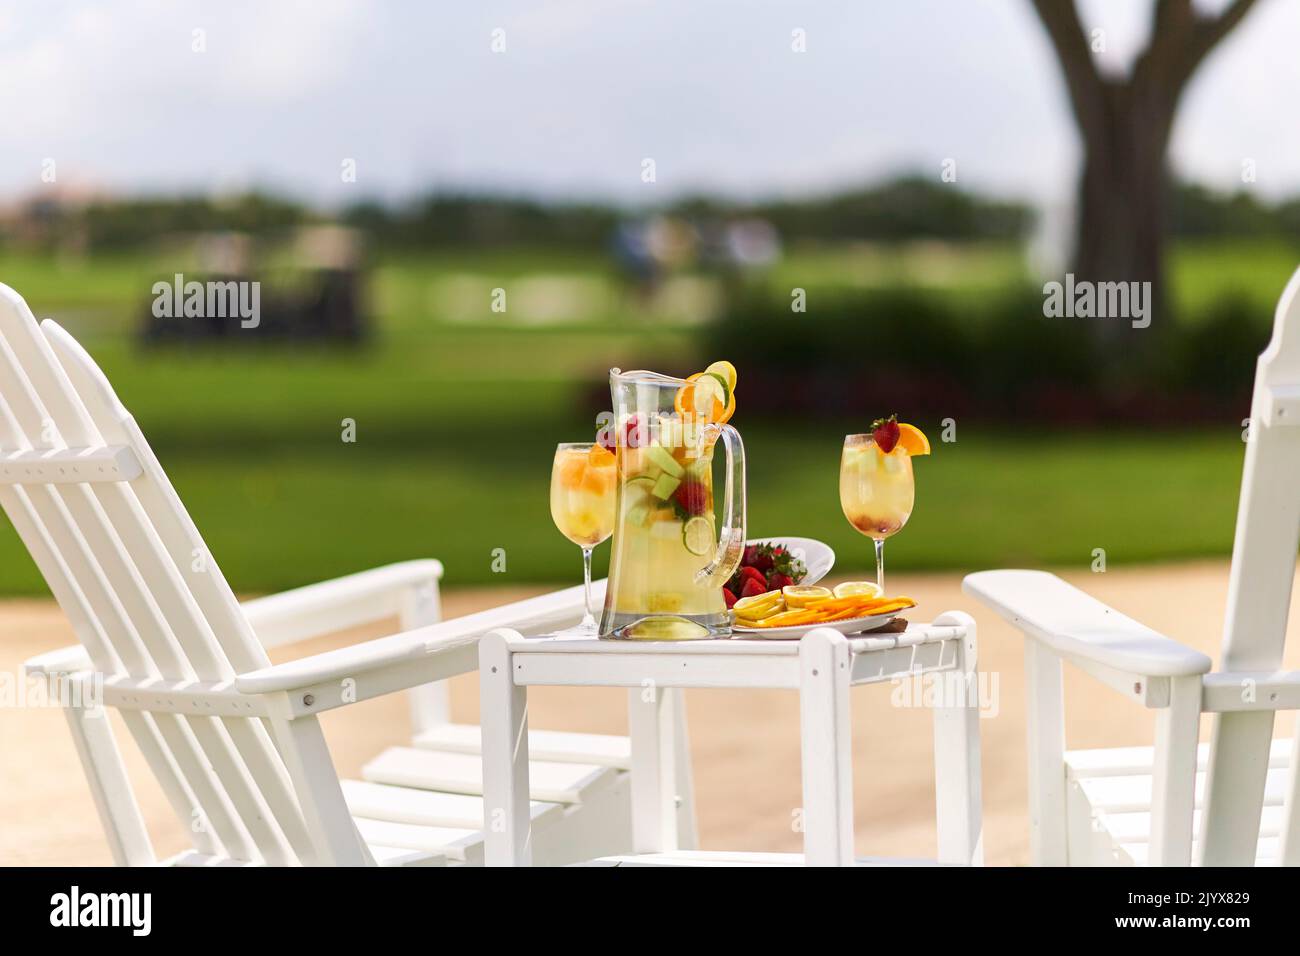 Lemonade in glass pitcher with slice oranges, and limes. Topped with strawberries.  Outdoors on small table with two white Adirondack chairs. Stock Photo